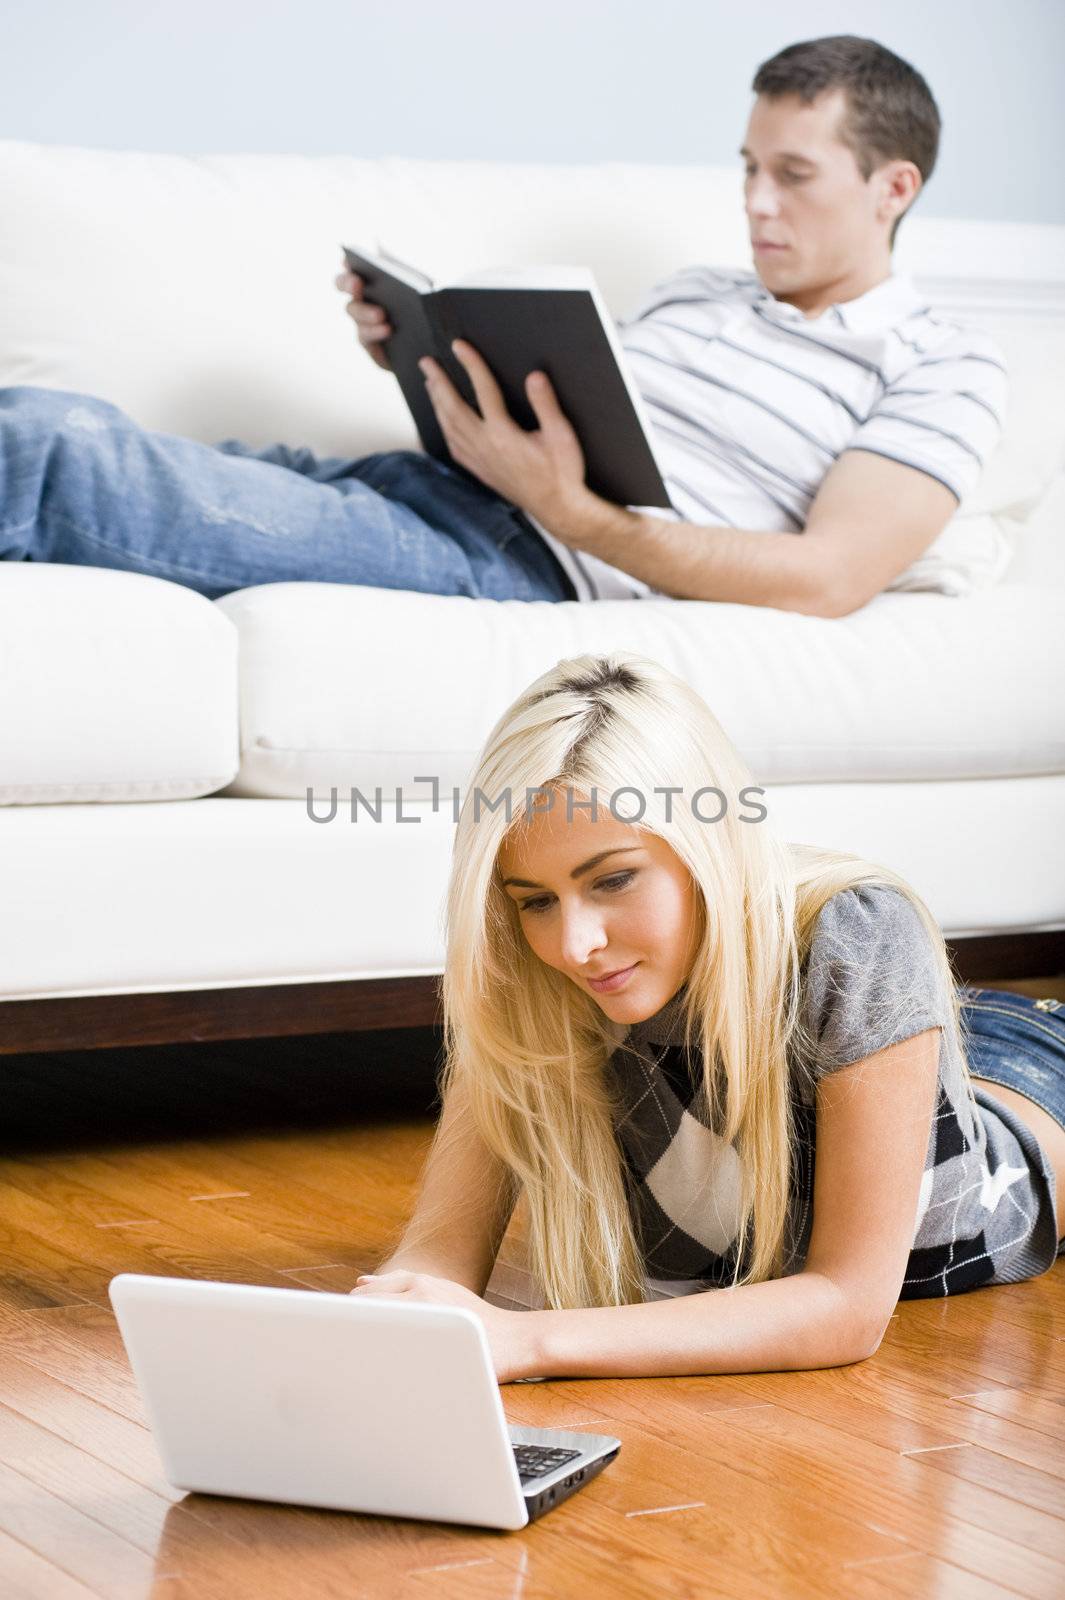 Man reads on a couch while woman stretches out on the floor with her laptop. Vertical format.